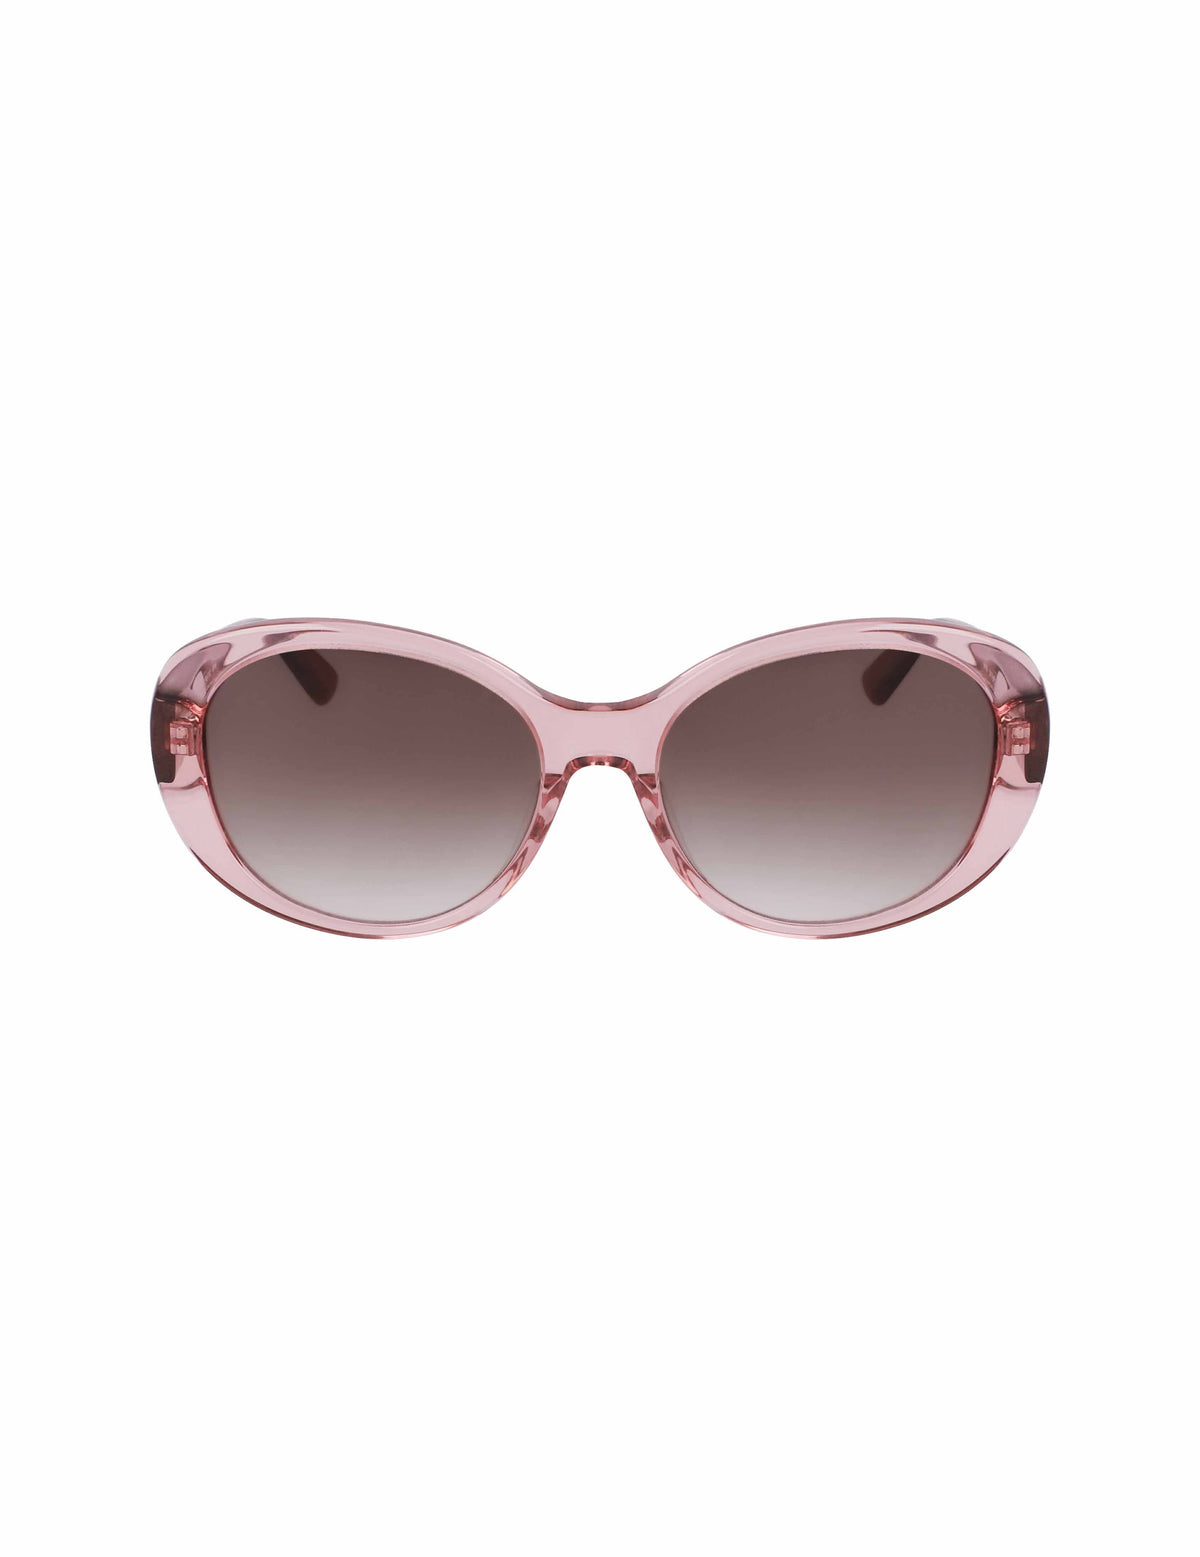 Anne Klein Pink Crystal Crystal Glamorous Oval Sunglasses